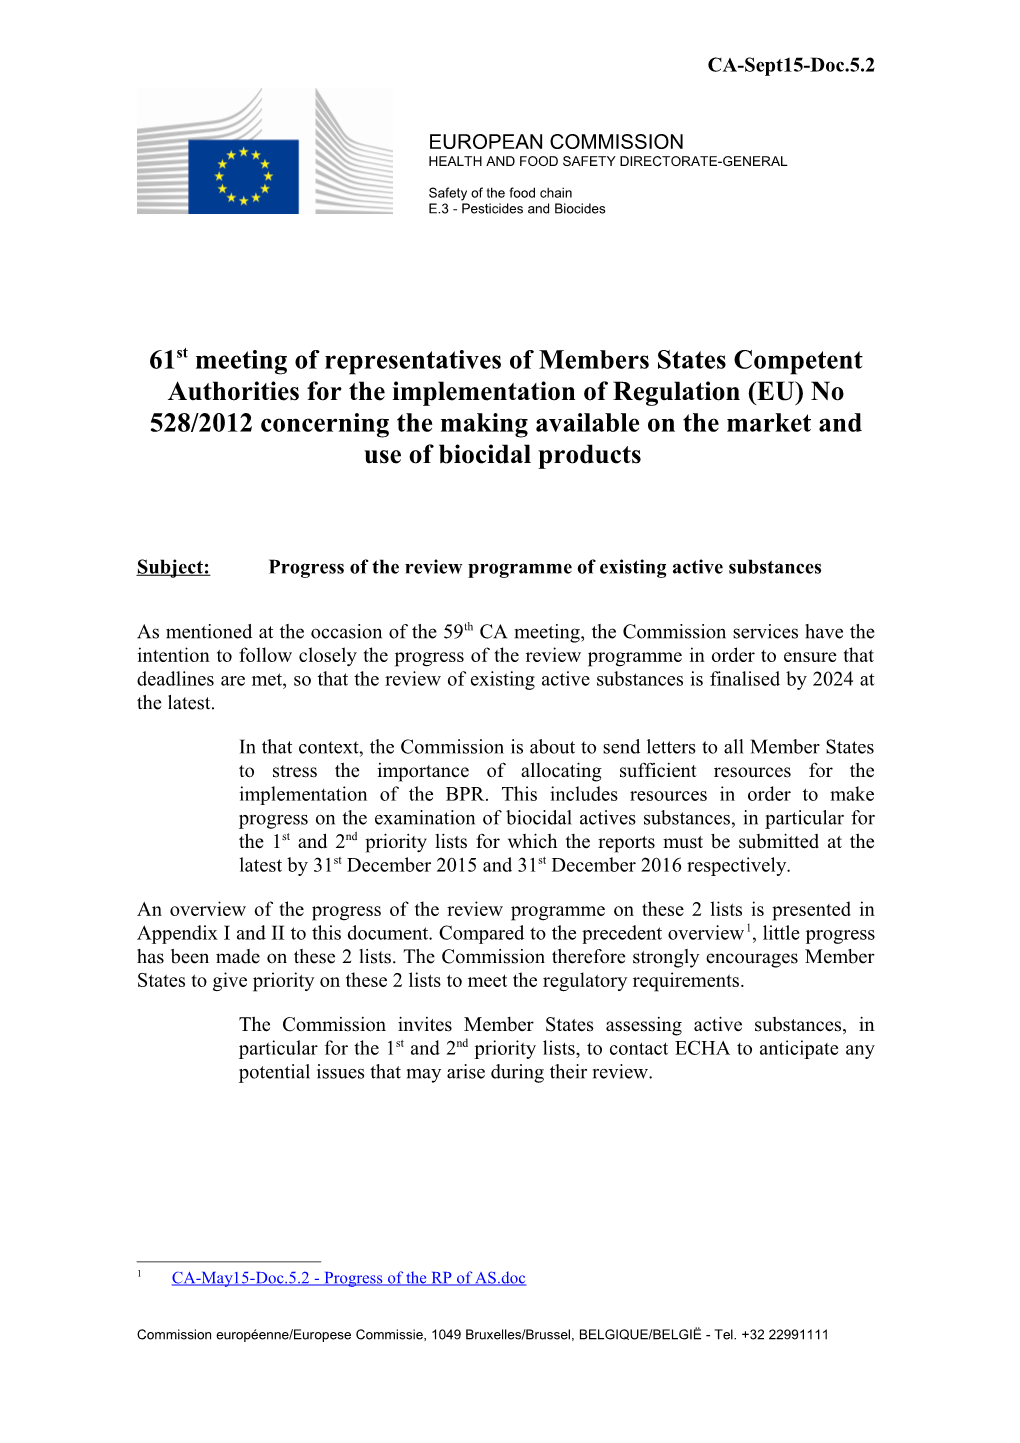 Subject:Progress of the Review Programme of Existing Active Substances